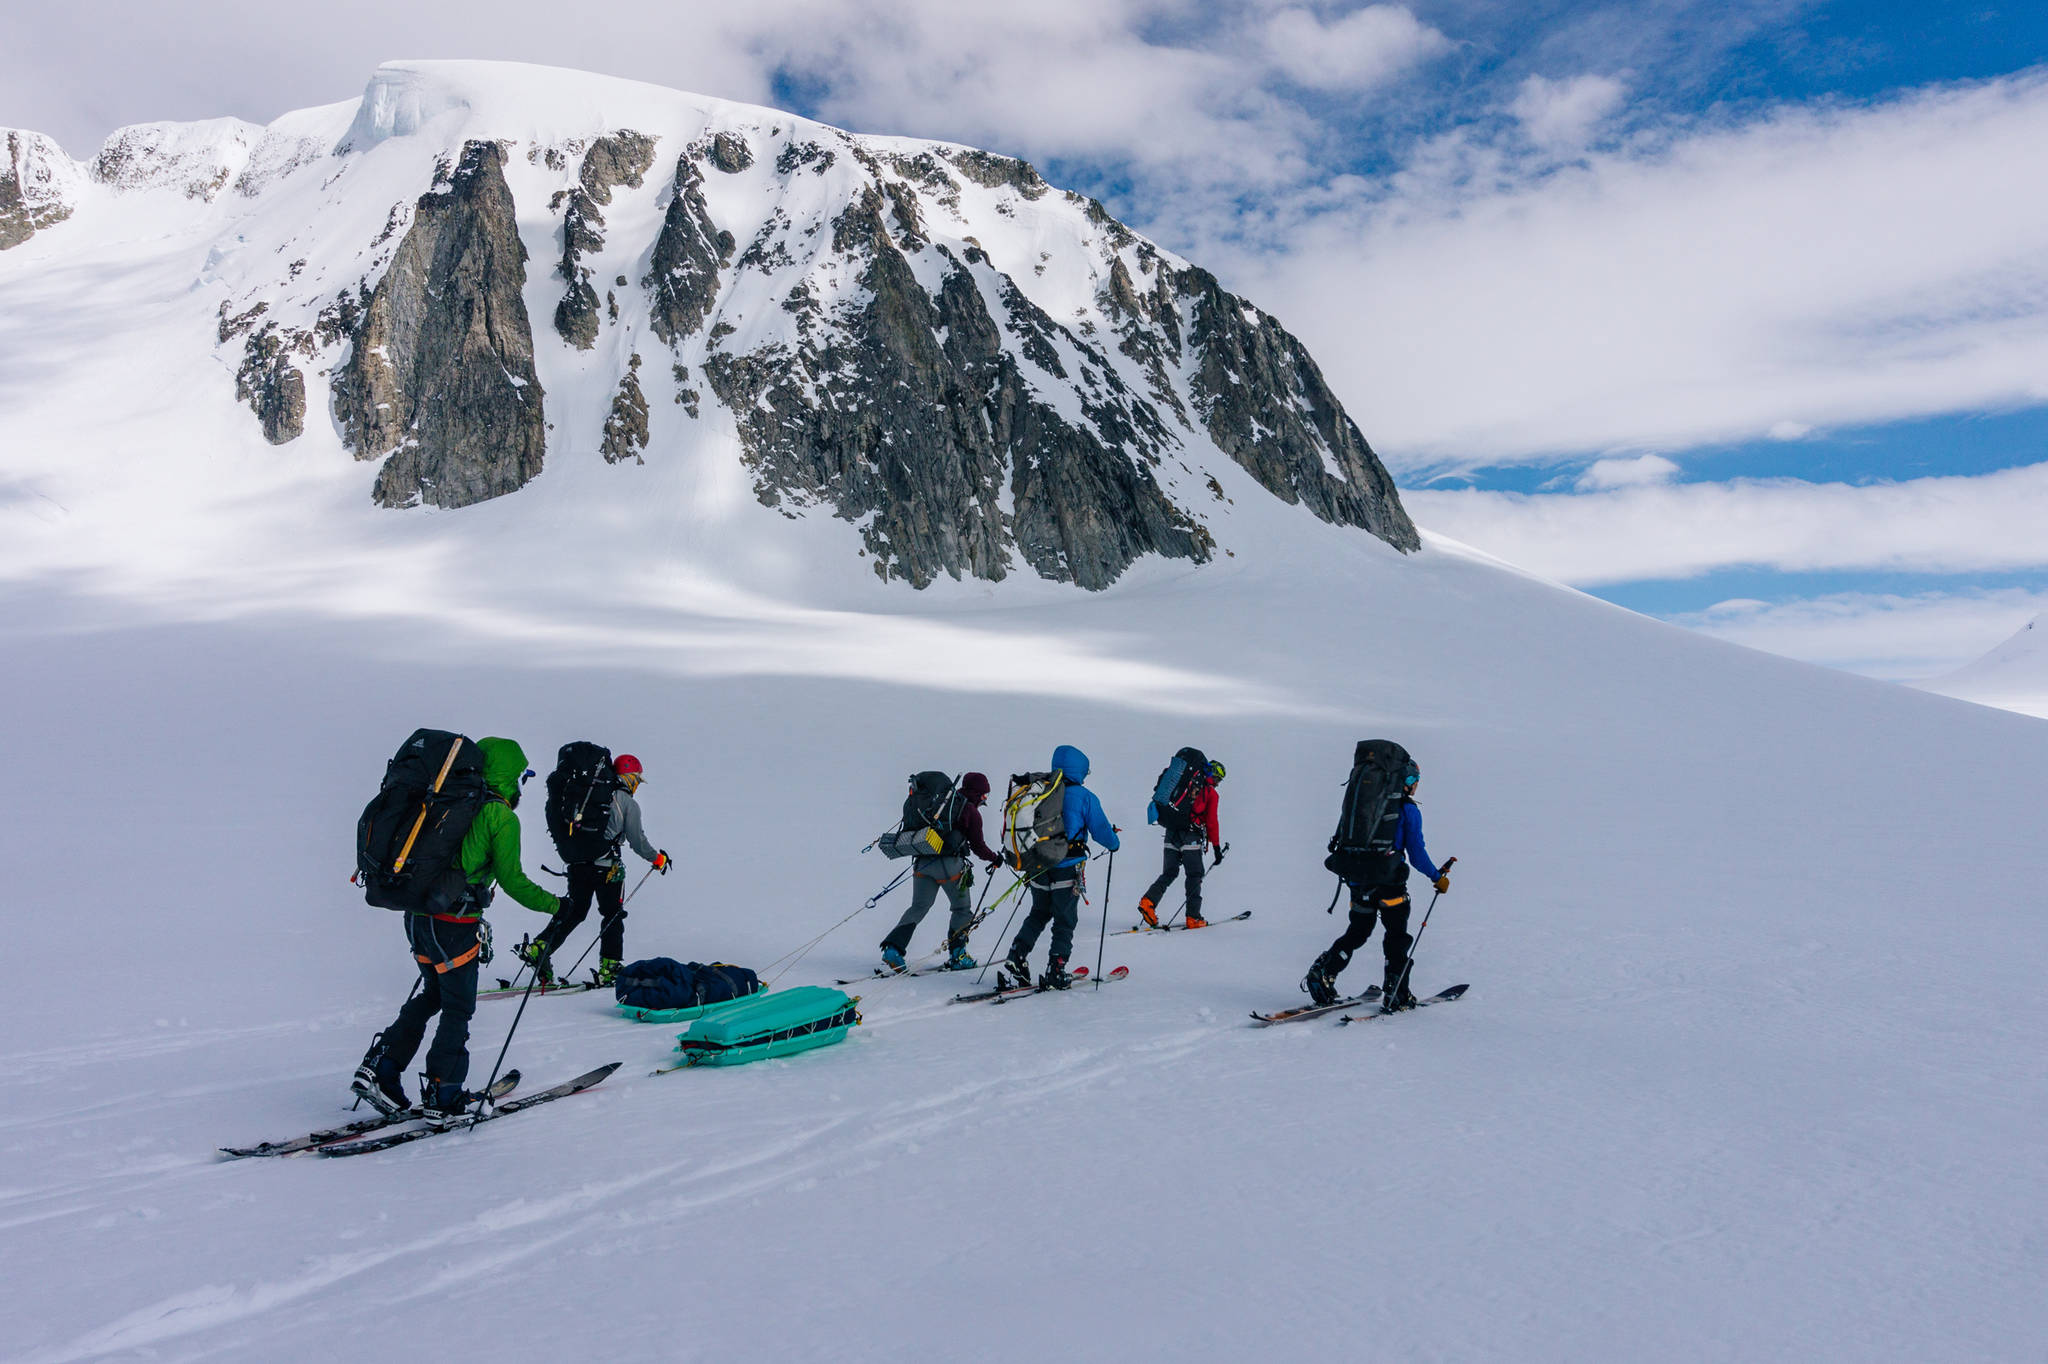 All steam ahead with huge packs and sleds. (Gabe Donohoe | For the Juneau Empire)